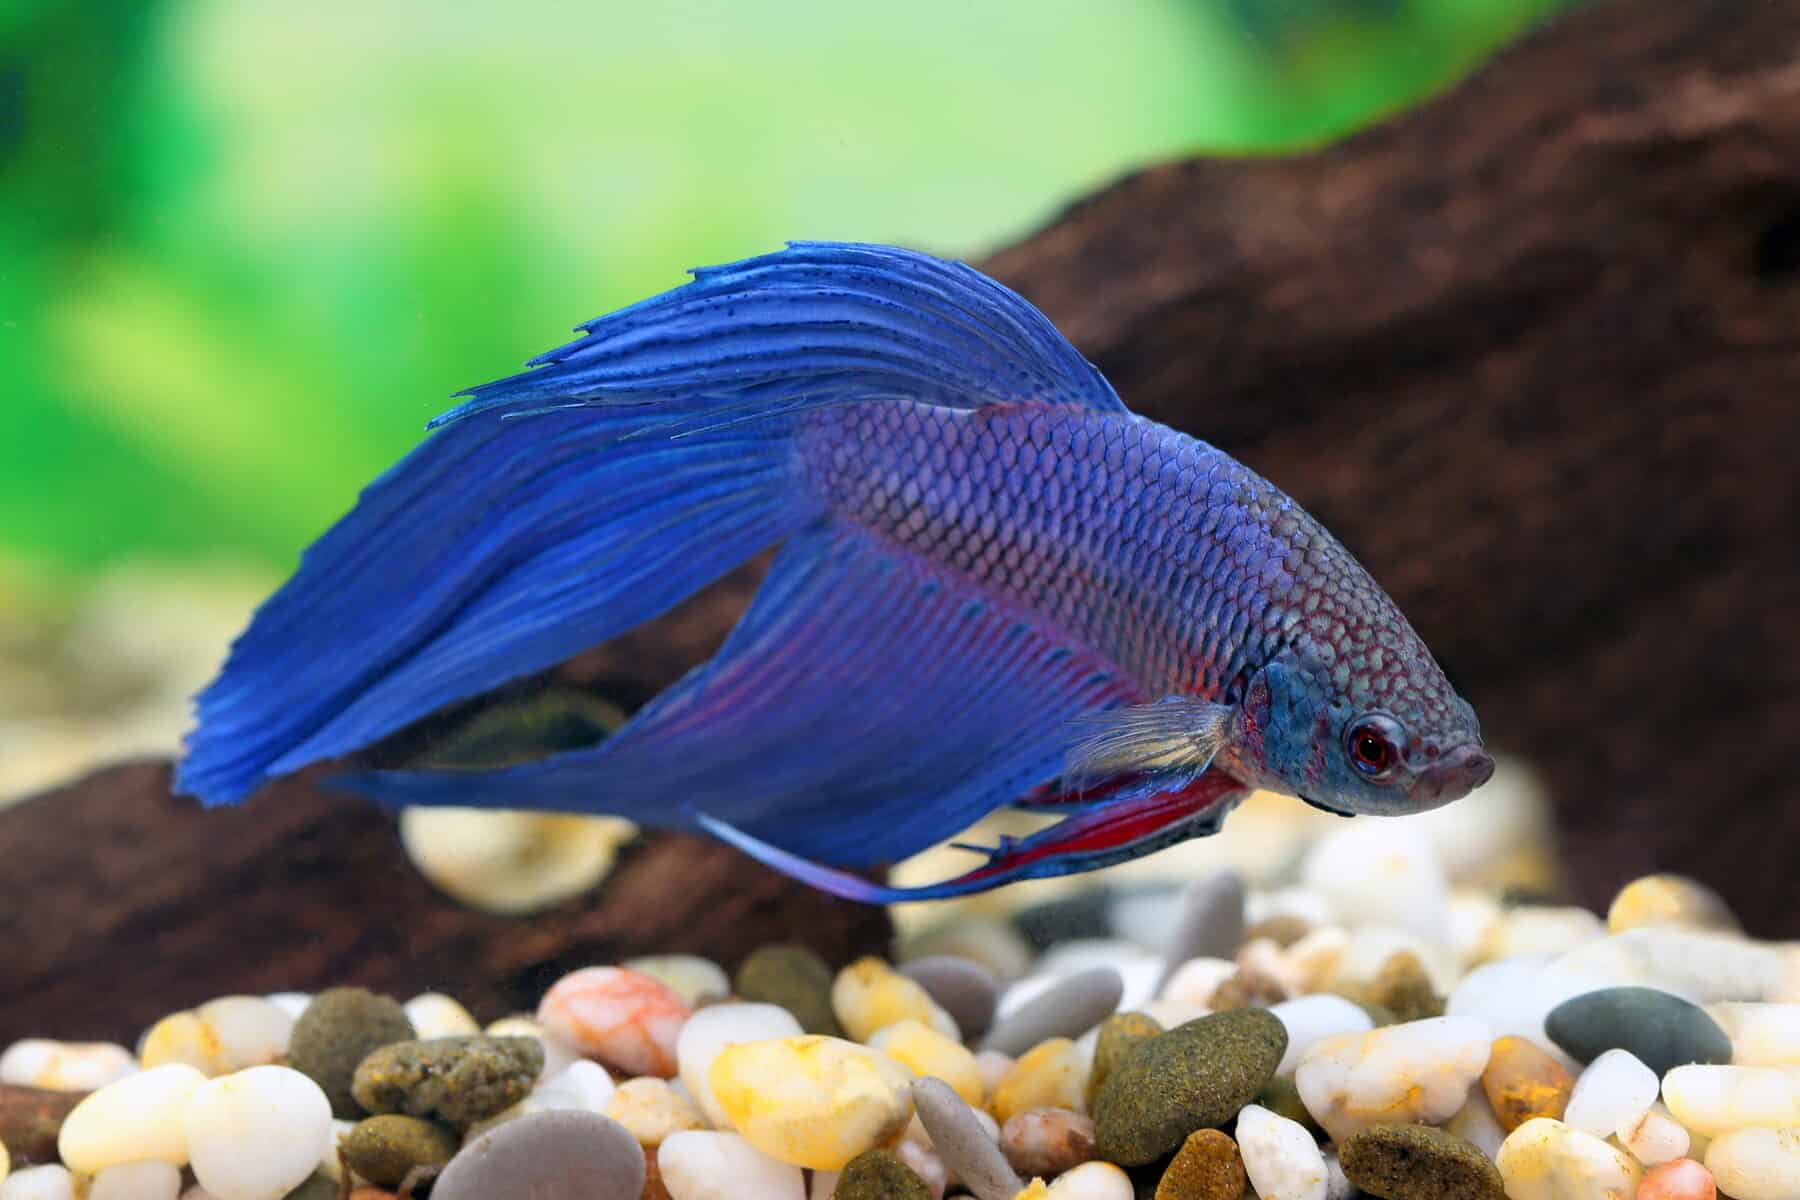 Poop Hanging From Betta Fish